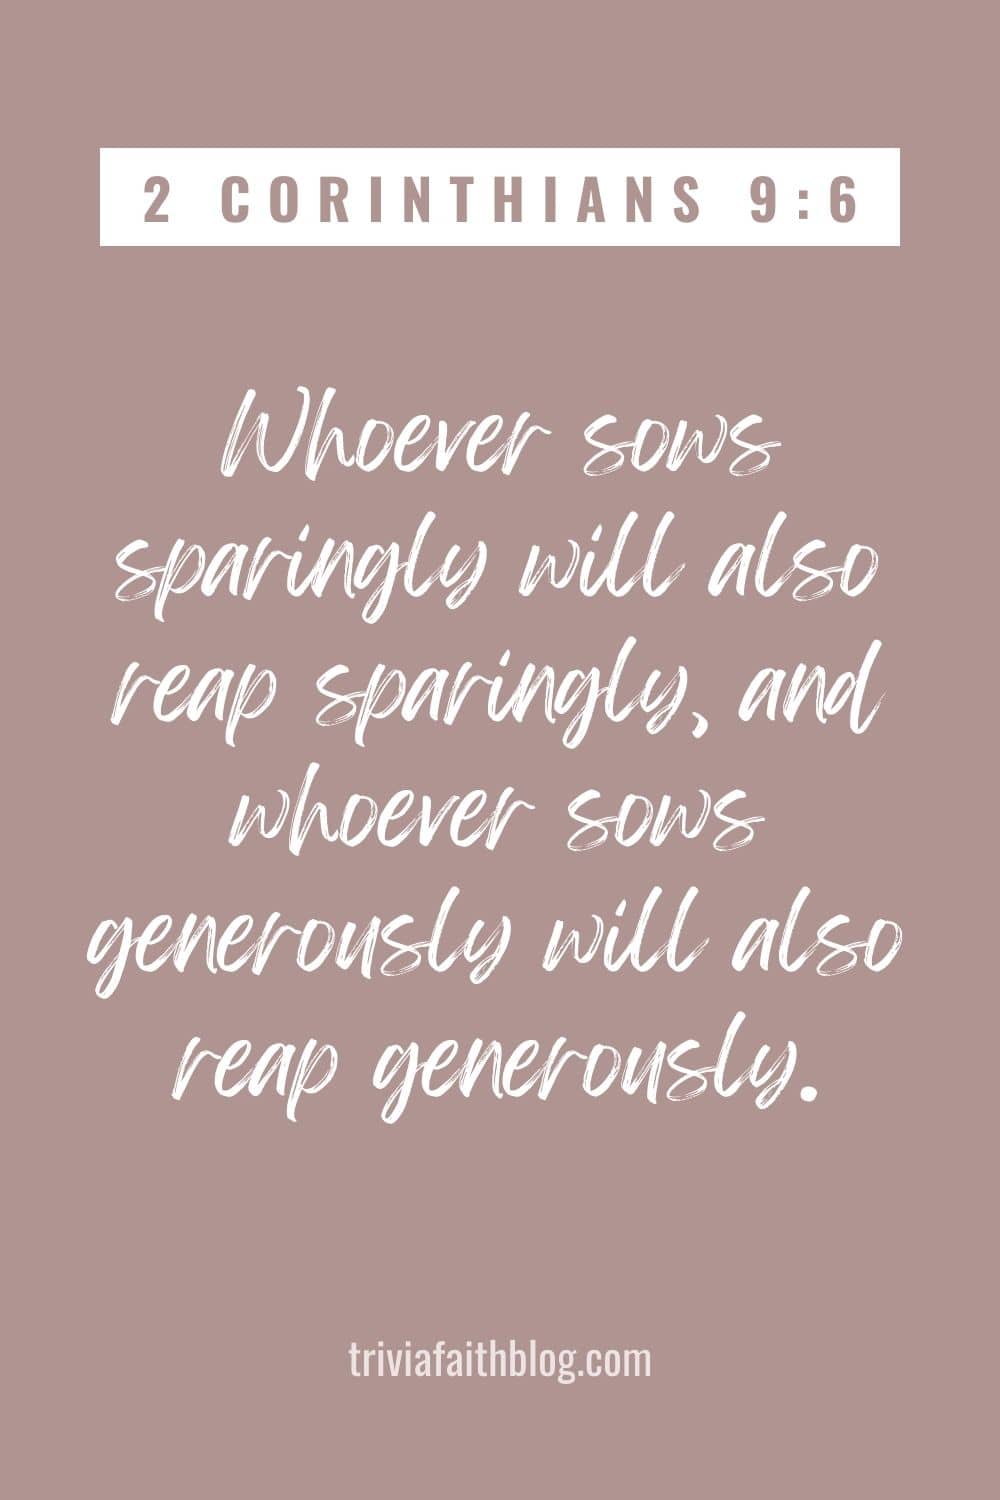 Whoever sows sparingly will also reap sparingly, and whoever sows generously will also reap generously